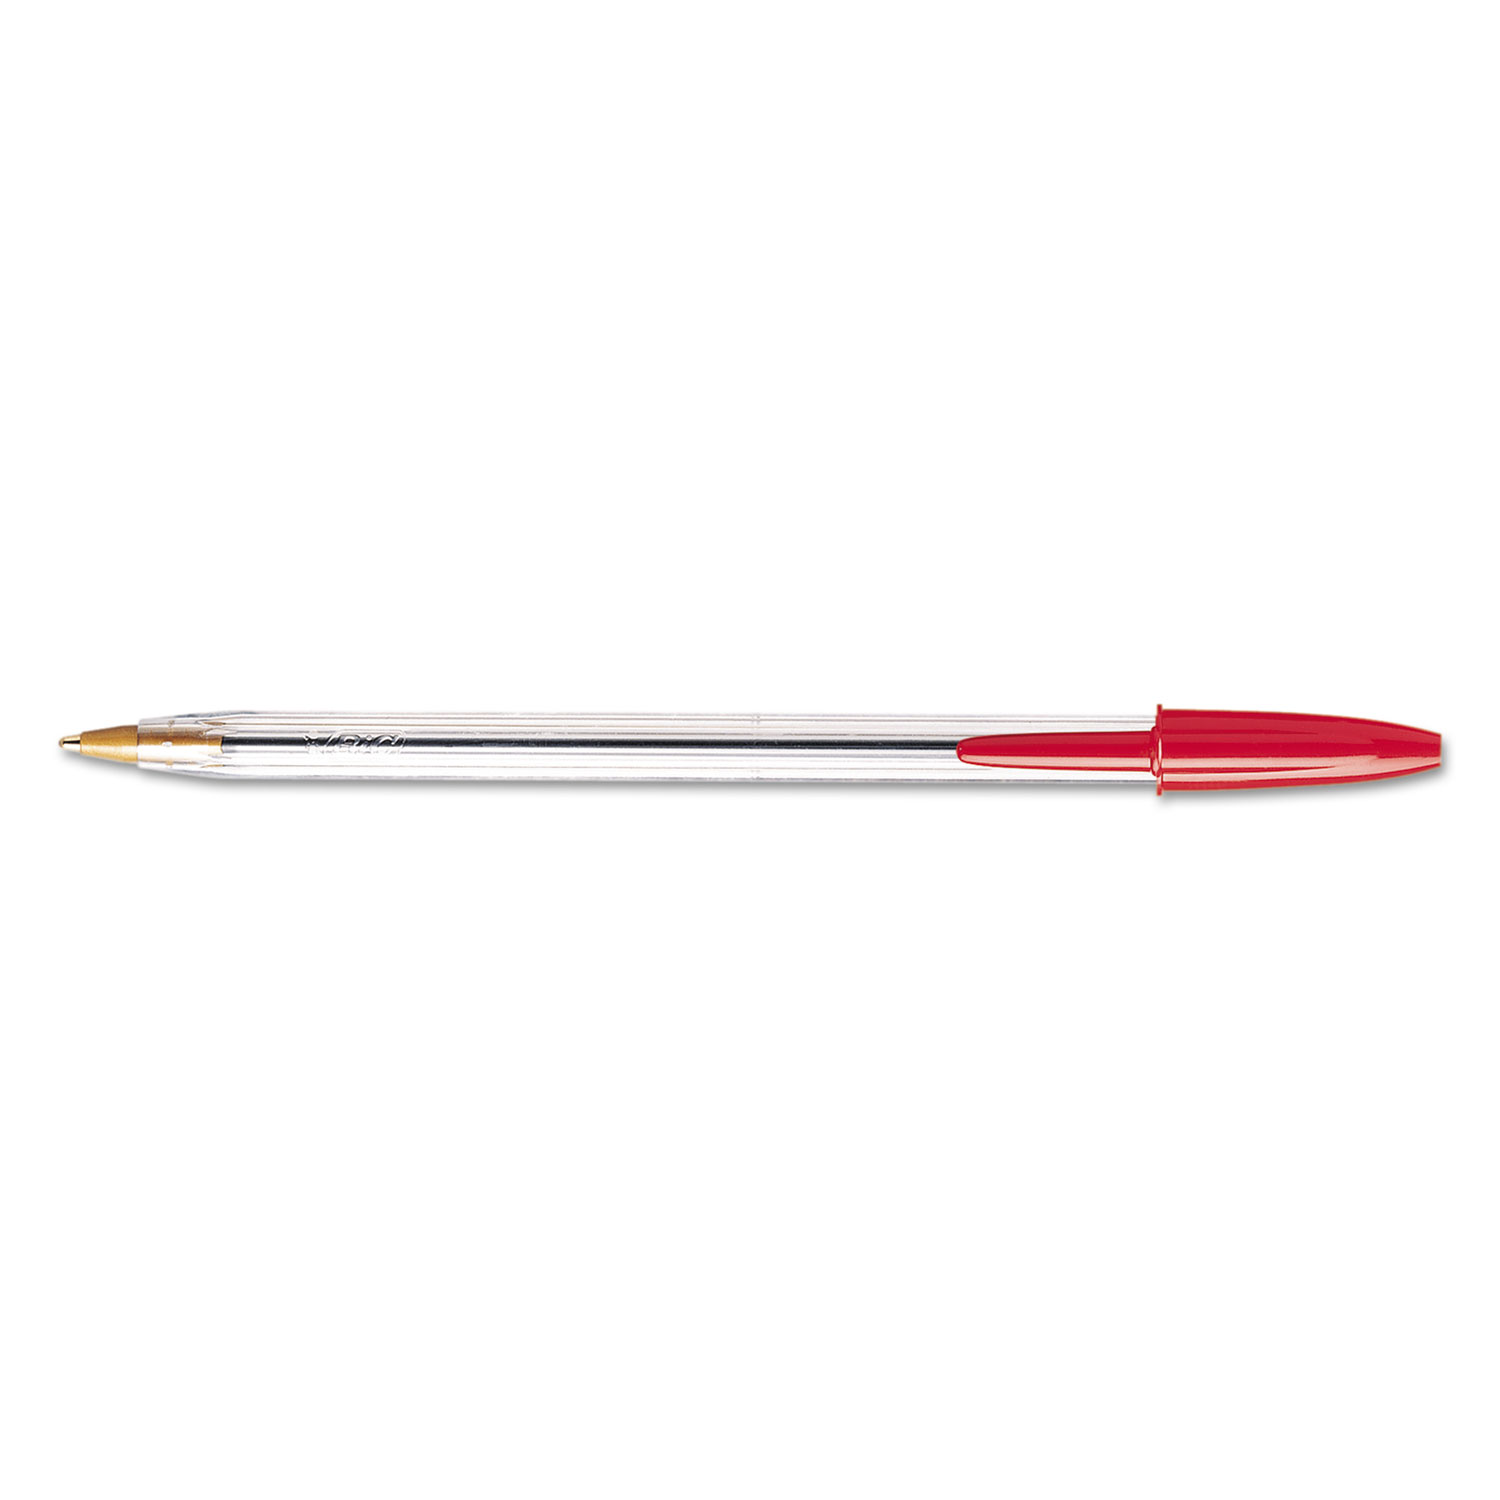  BIC MS11 RED Cristal Xtra Smooth Stick Ballpoint Pen, 1mm, Red Ink, Clear Barrel, Dozen (BICMS11RD) 